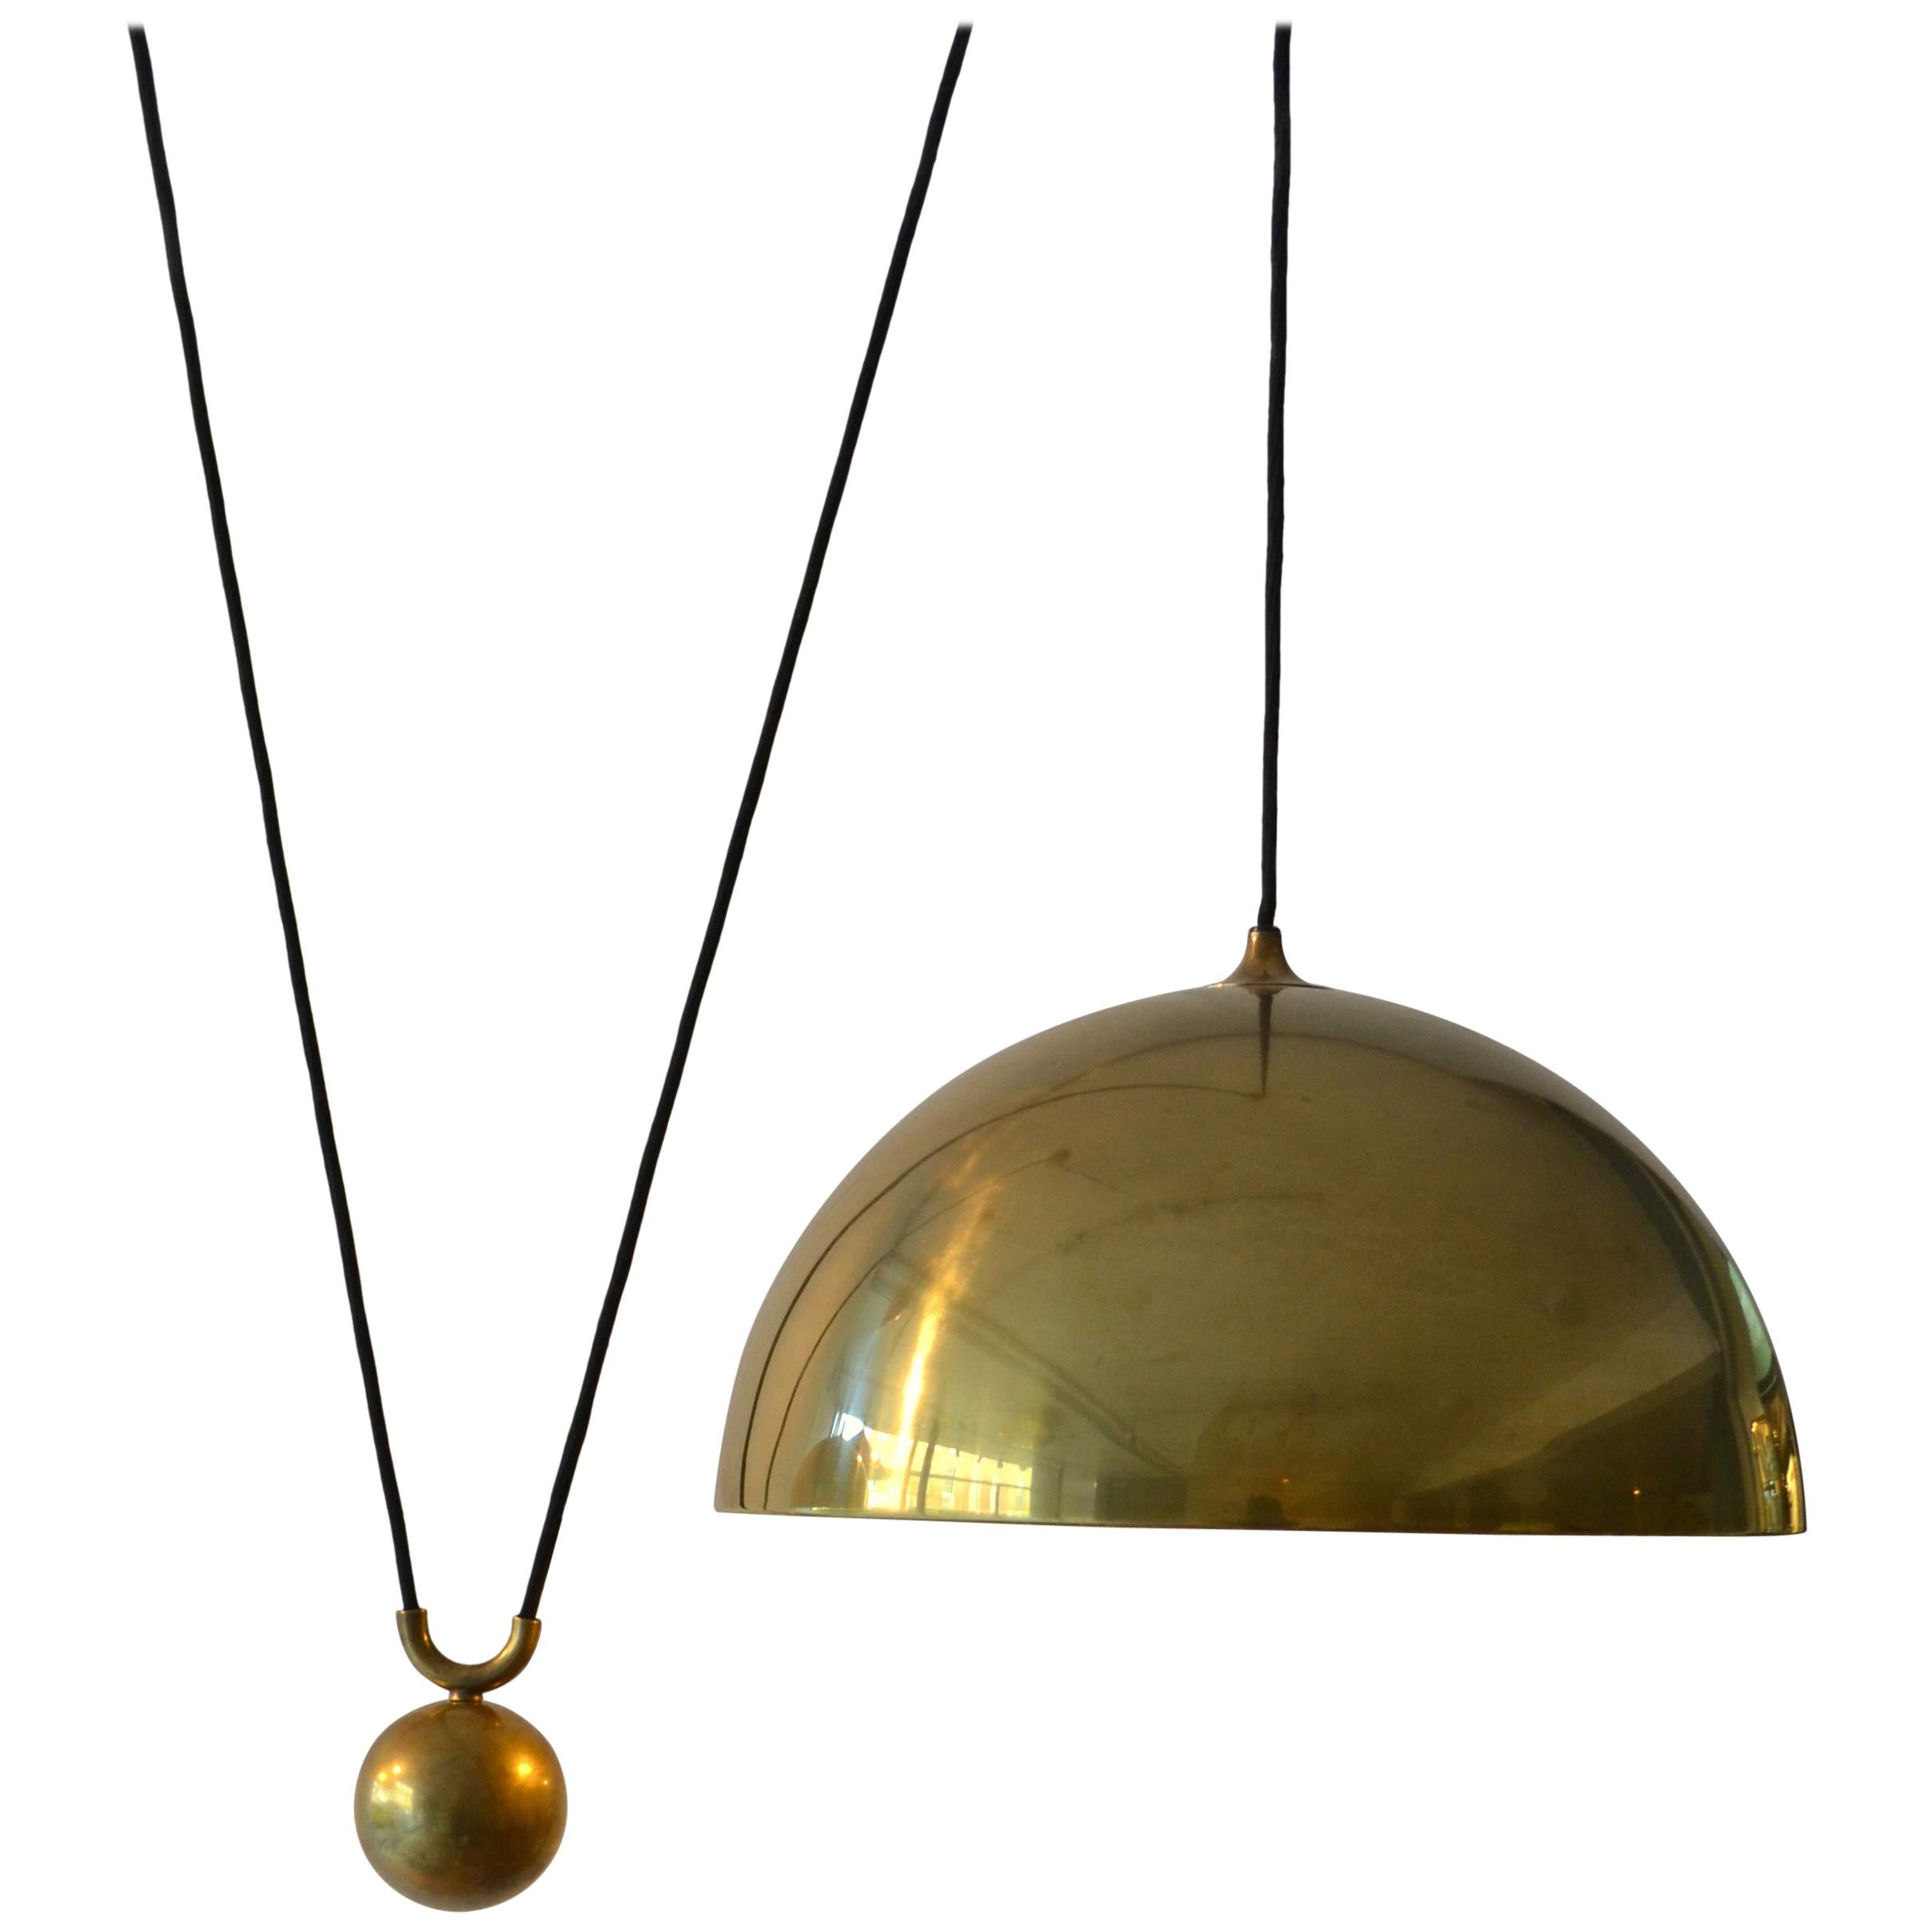 Counterbalance Brass Pendant 'Posa' Side Weight by Florian Schulz